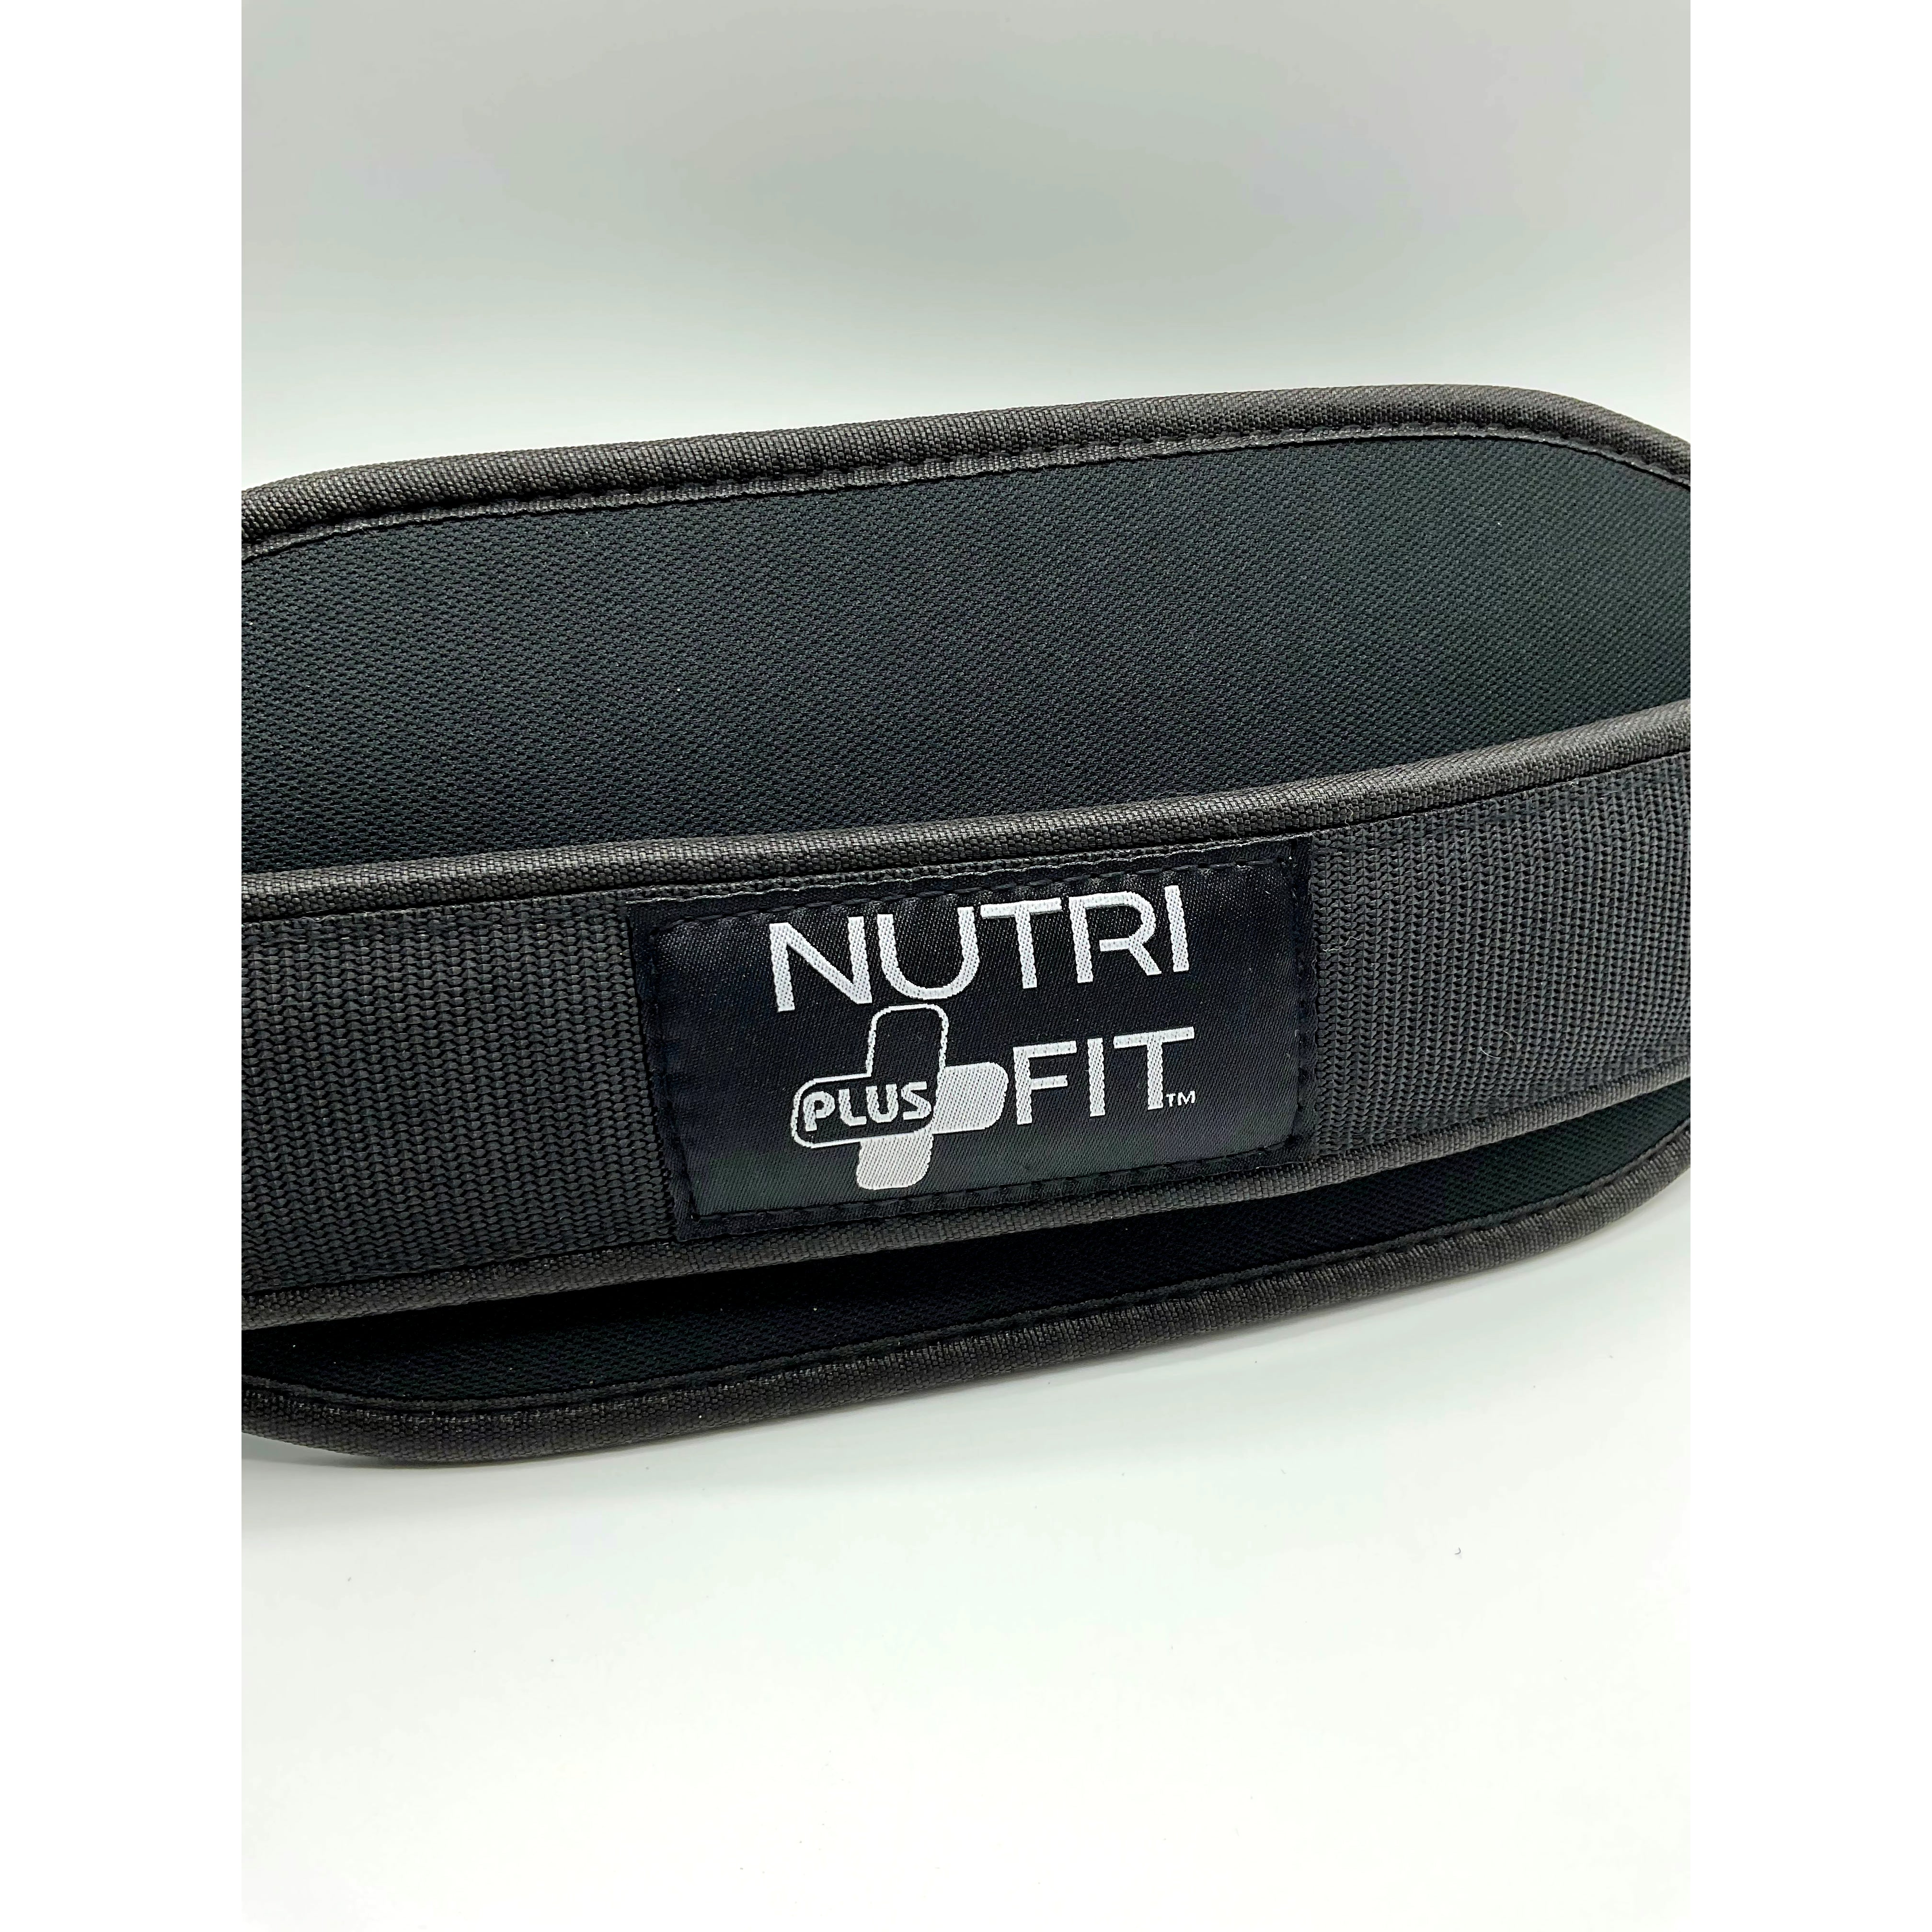 Nutri Fit Plus Premium Weightlifting Belt for Fitness, Weightlifting and Olympic Lifting - Support for Men and Women - Deadlift Professional Training Belt- Easy Locking